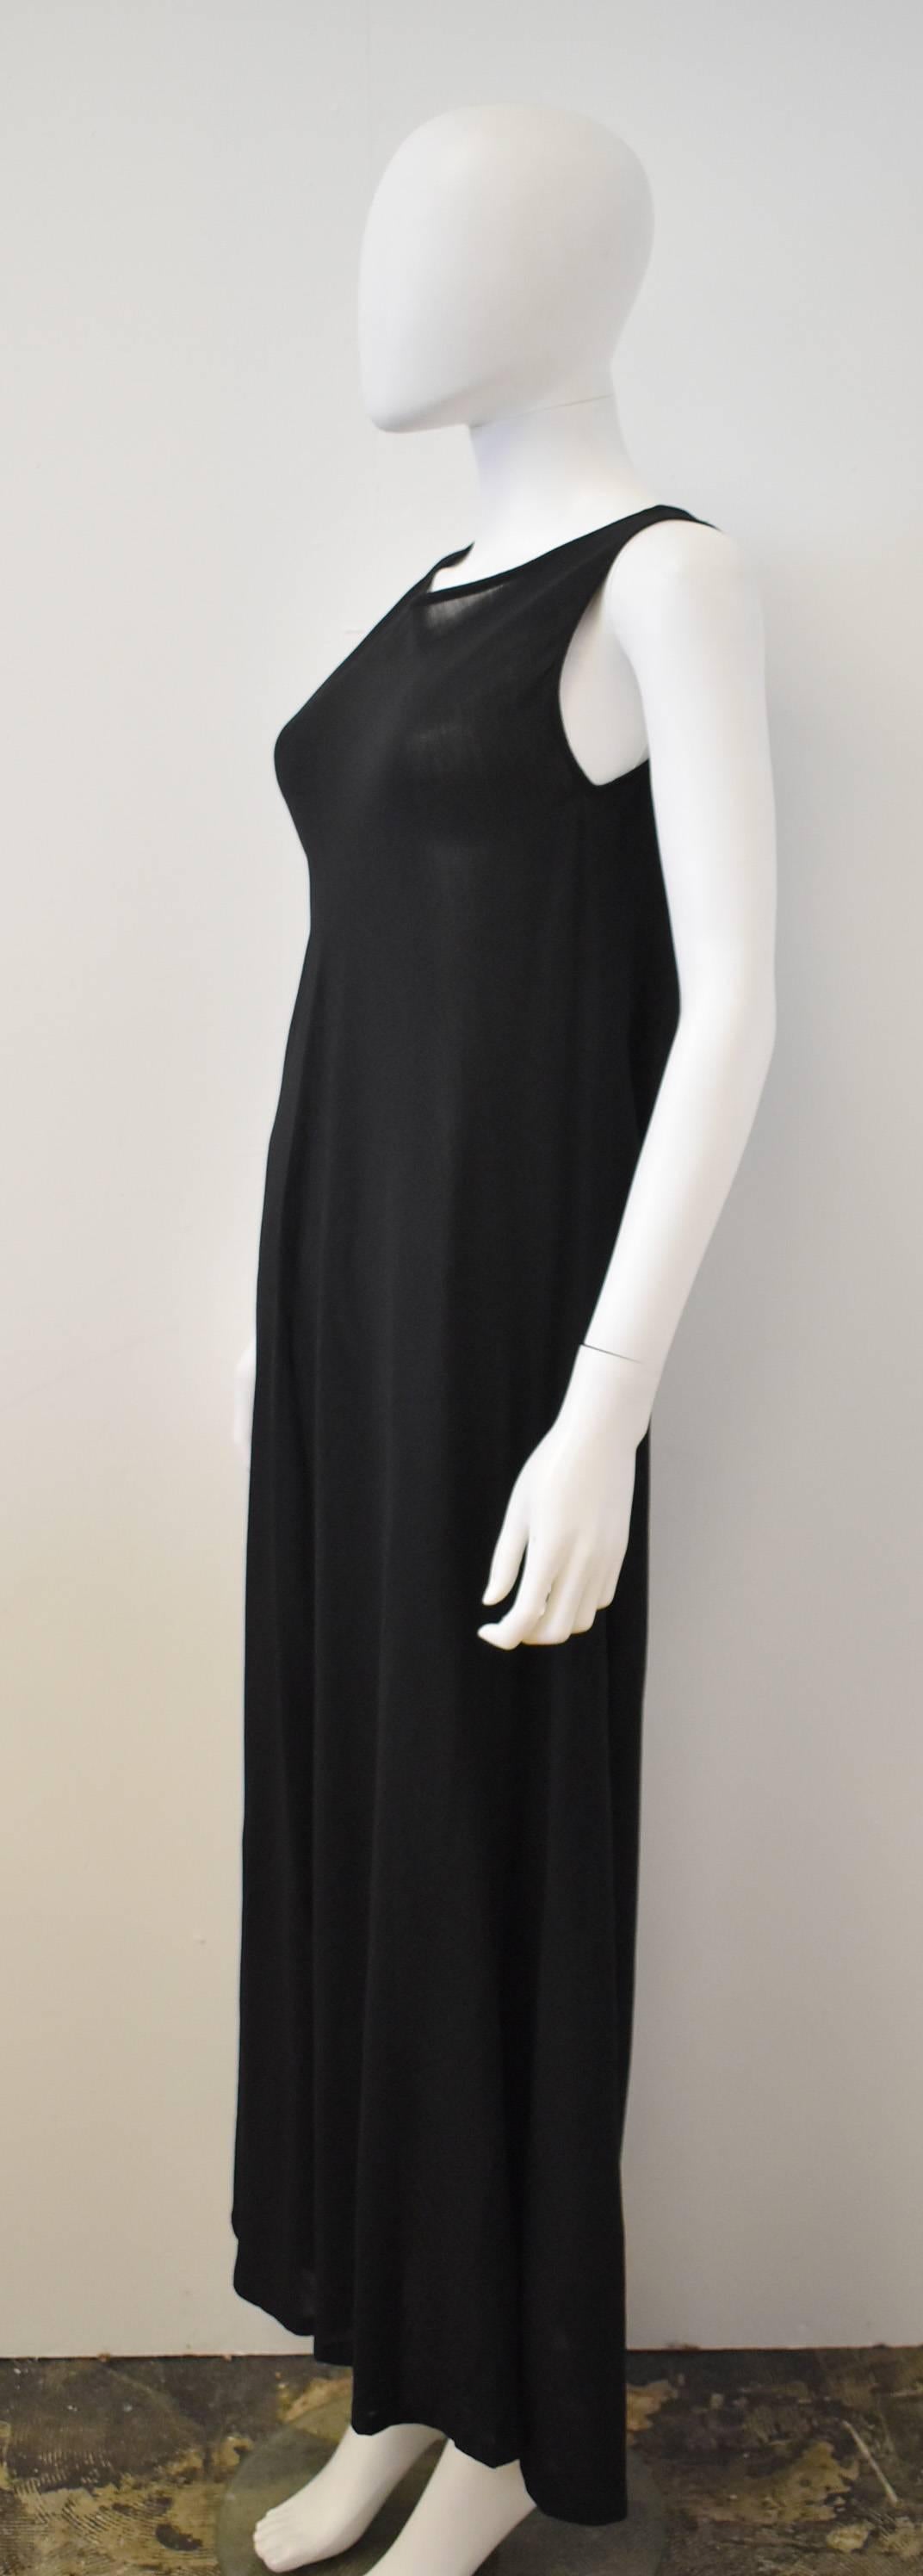 A beautiful semi-sheer dress from Y’s by Yohji Yamamoto. The sleeveless dress is ankle length with a simple A-line shape that is cut on the bias creating a skirt that falls with soft folds and has great movement. The material is a thin wool blend